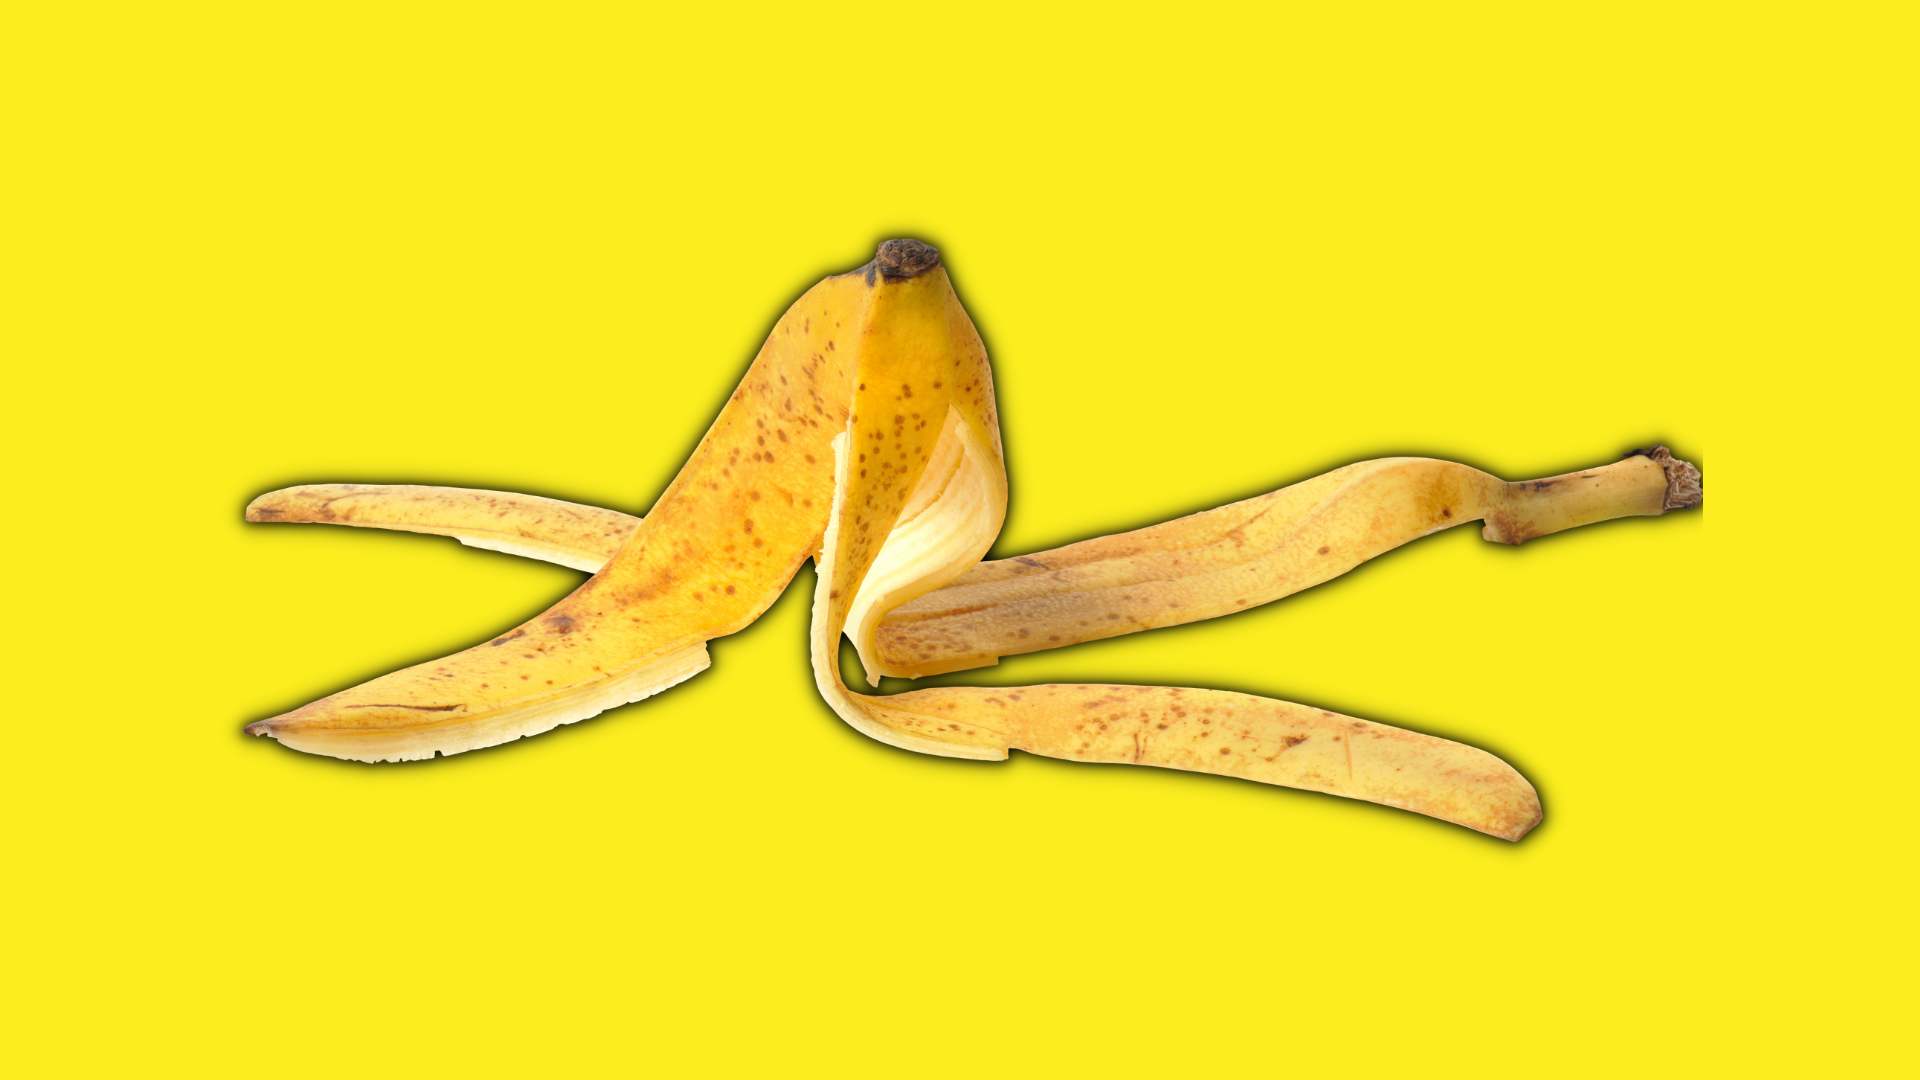 Don't throw out that banana peel! Here's how it can enhance baking